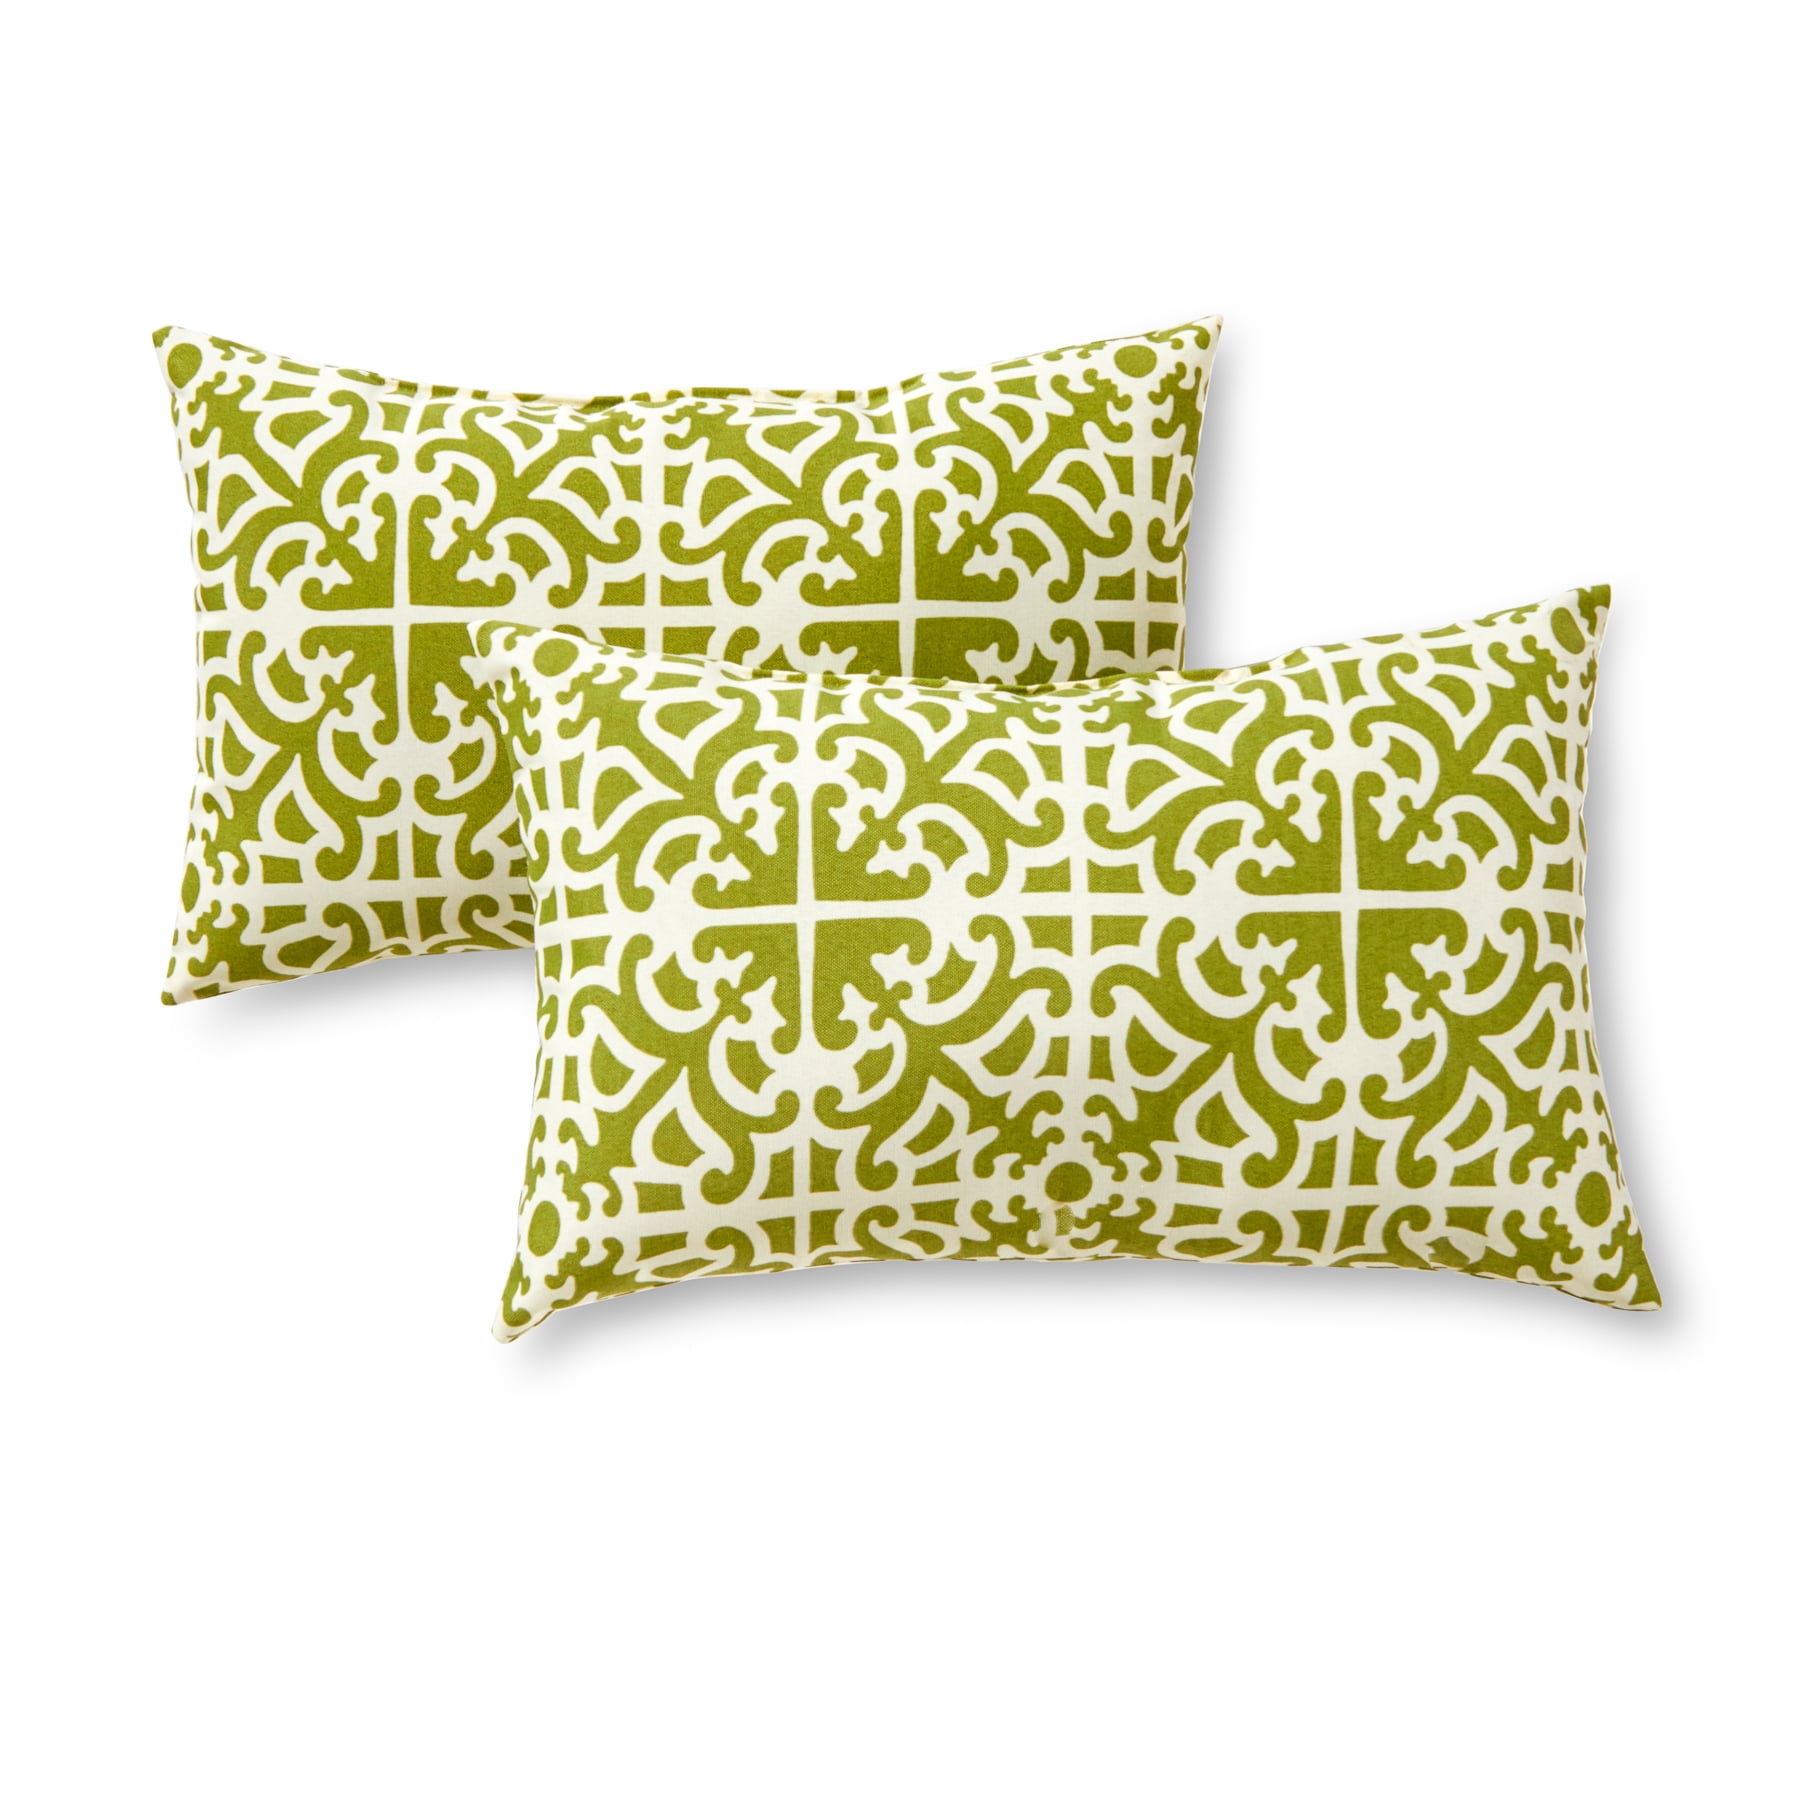 Pack of 2 Greendale Home Fashions* Rectangle Outdoor Accent Pillow Lattice 19 x 12 in Indigo 